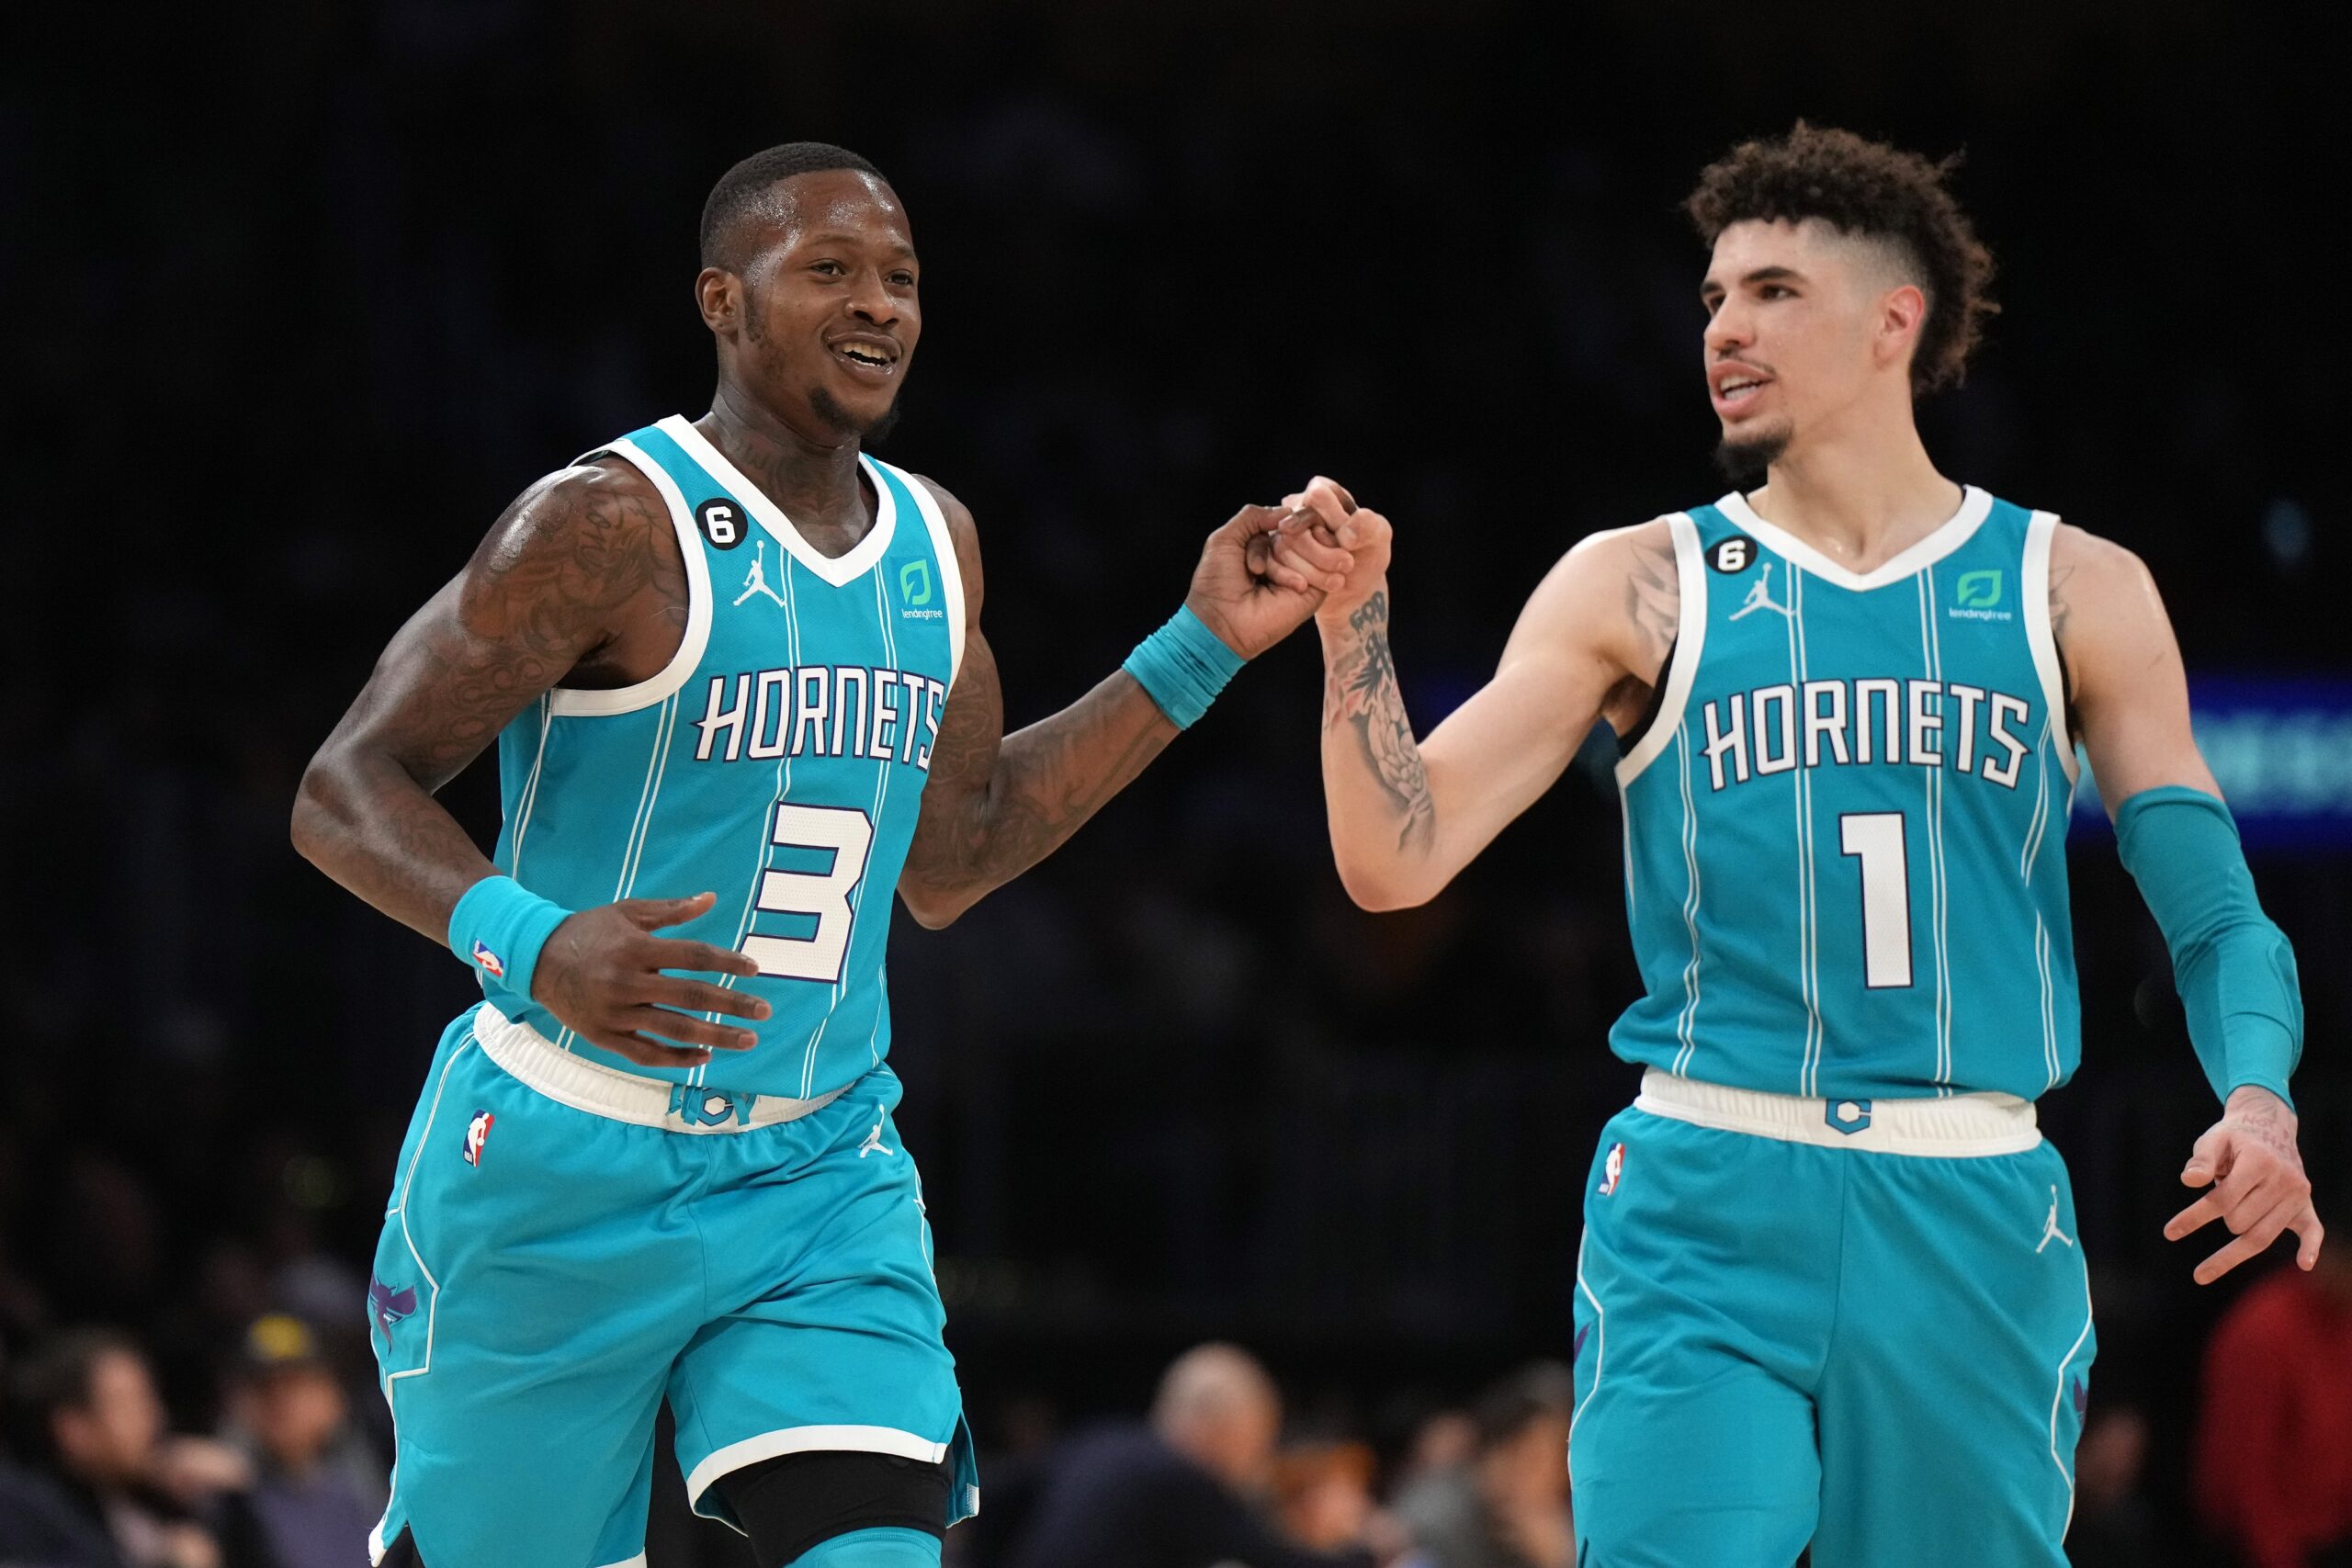 Dec 23, 2022; Los Angeles, California, USA; Charlotte Hornets guard Terry Rozier (3) celebrates with guard LaMelo Ball (1) after a three-point basket in the second half against the Los Angeles Lakers at Crypto.com Arena. The Hornets defeated the Lakers 134-130. Mandatory Credit: Kirby Lee-USA TODAY Sports